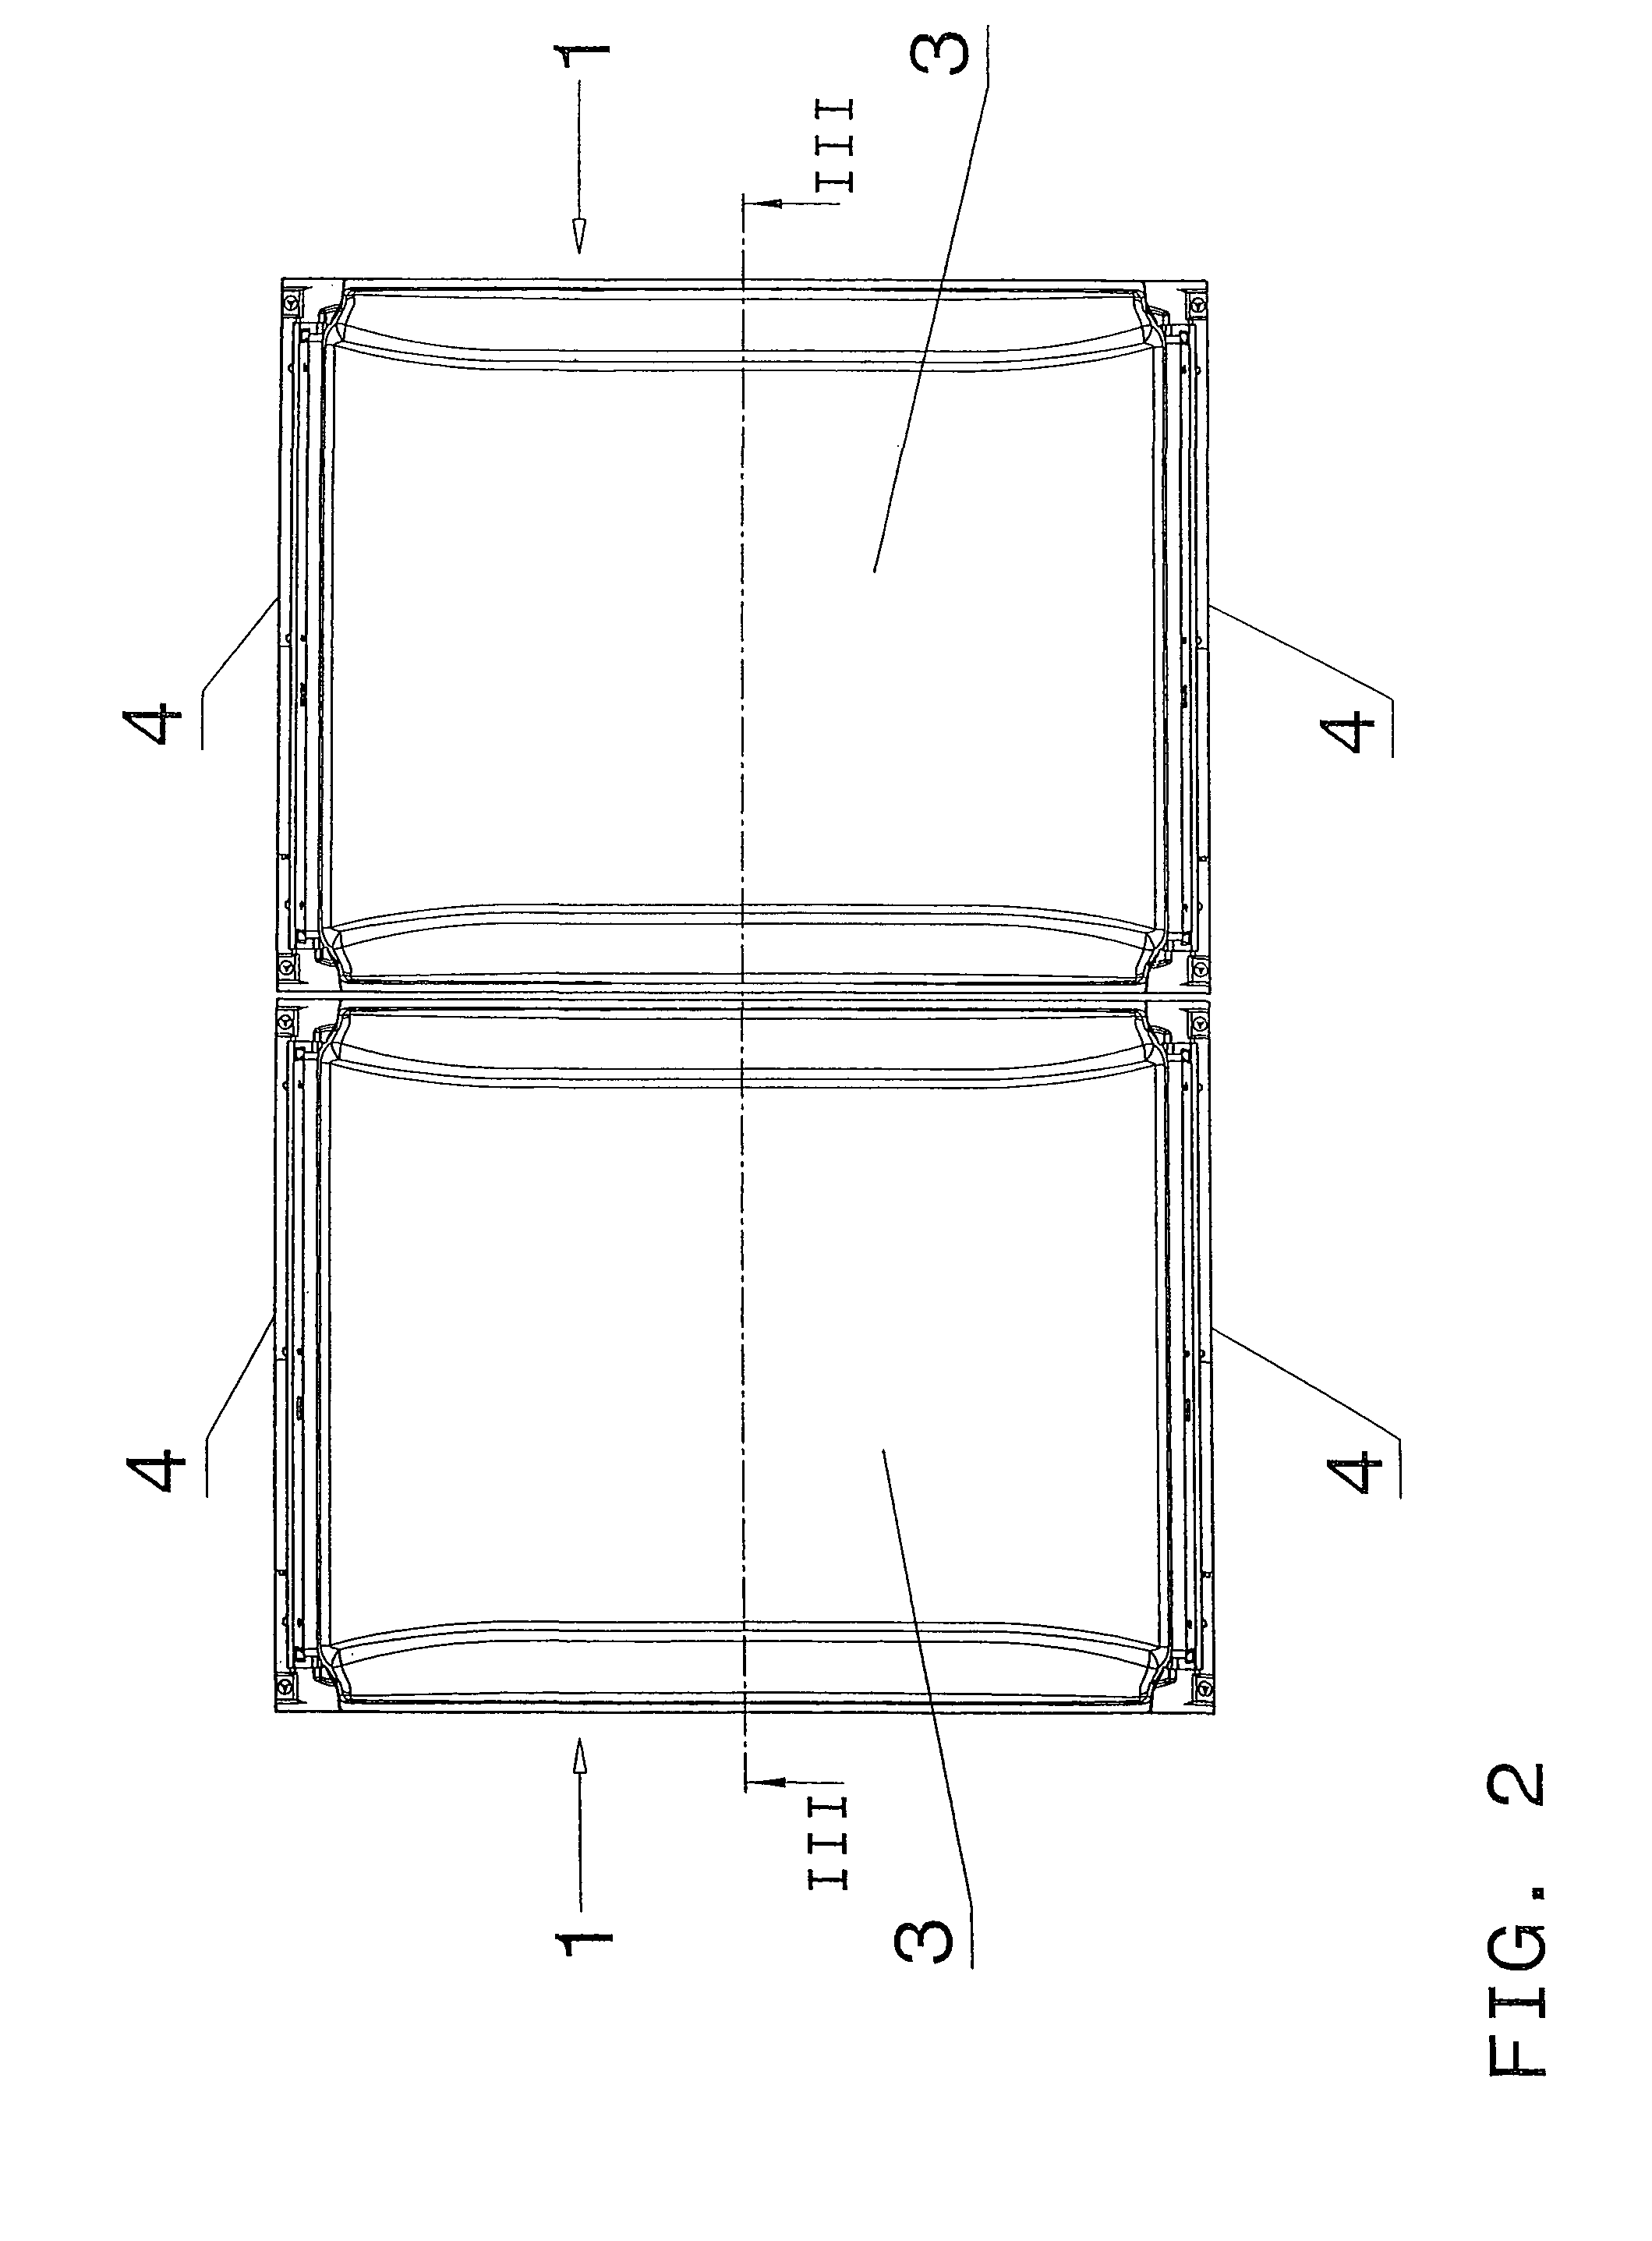 Ceiling panel for lining interiors of vehicles